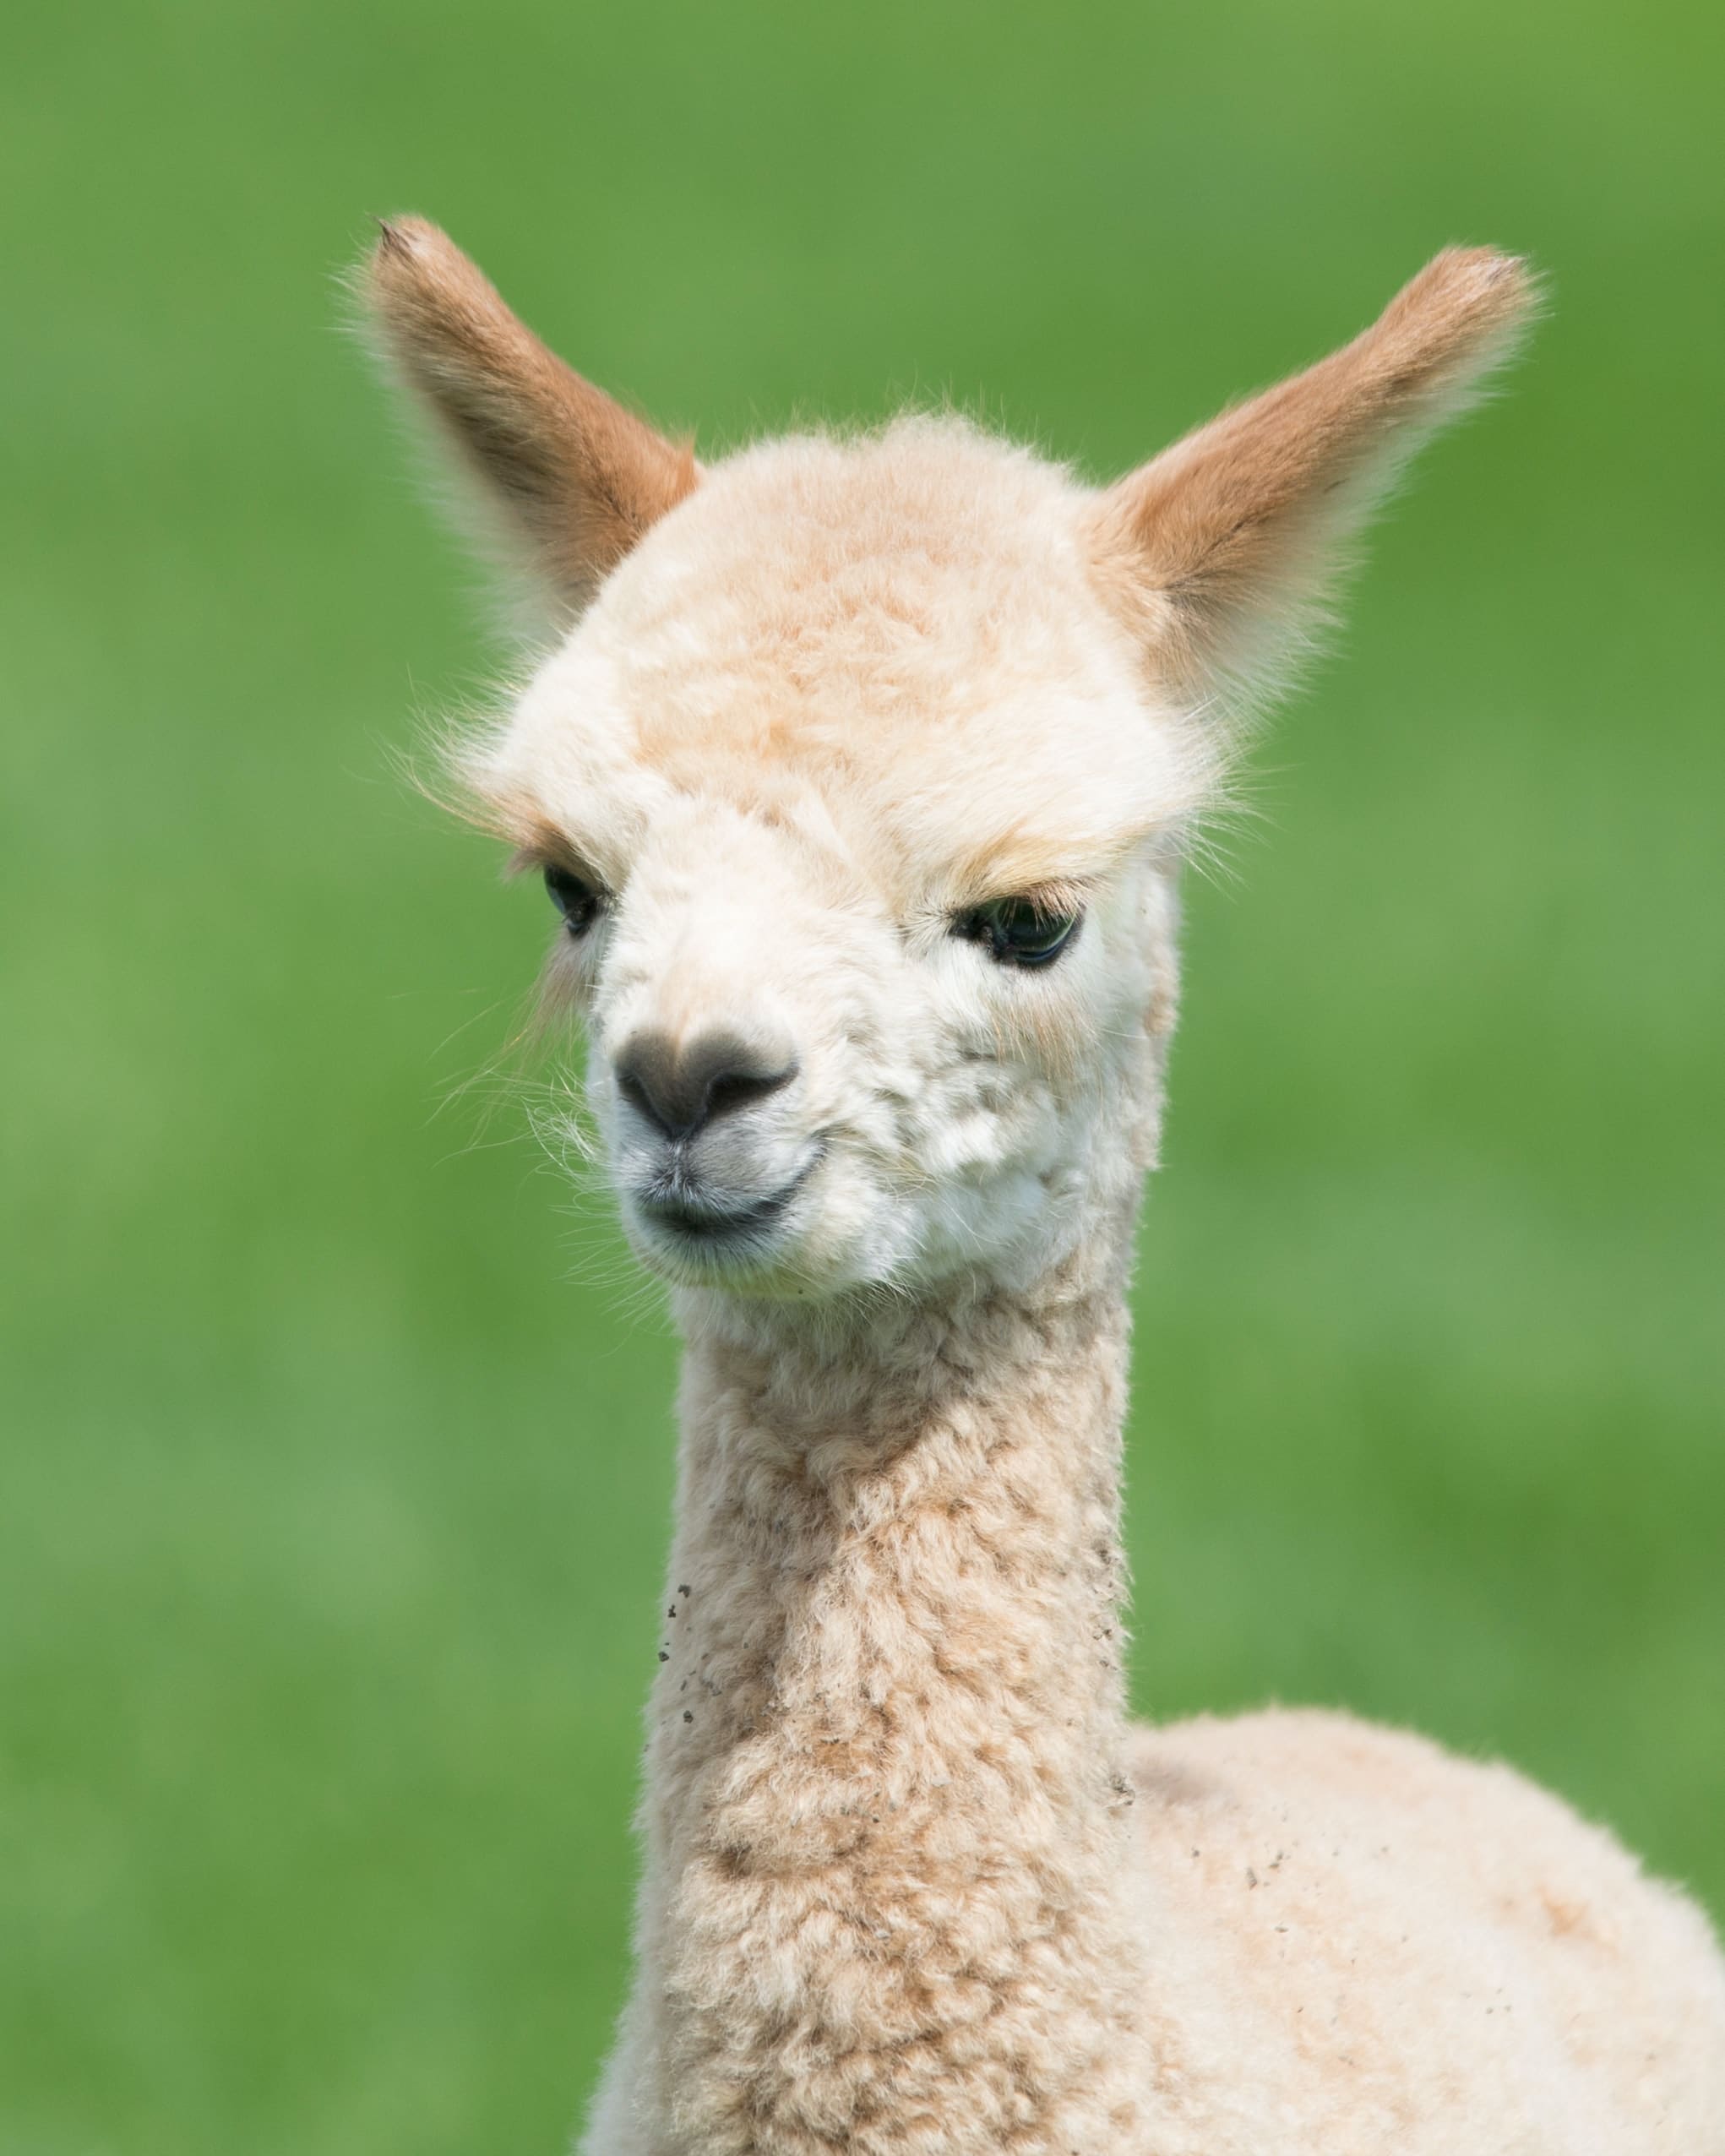 Green grassy background with white alpaca looking at camera with black eyes